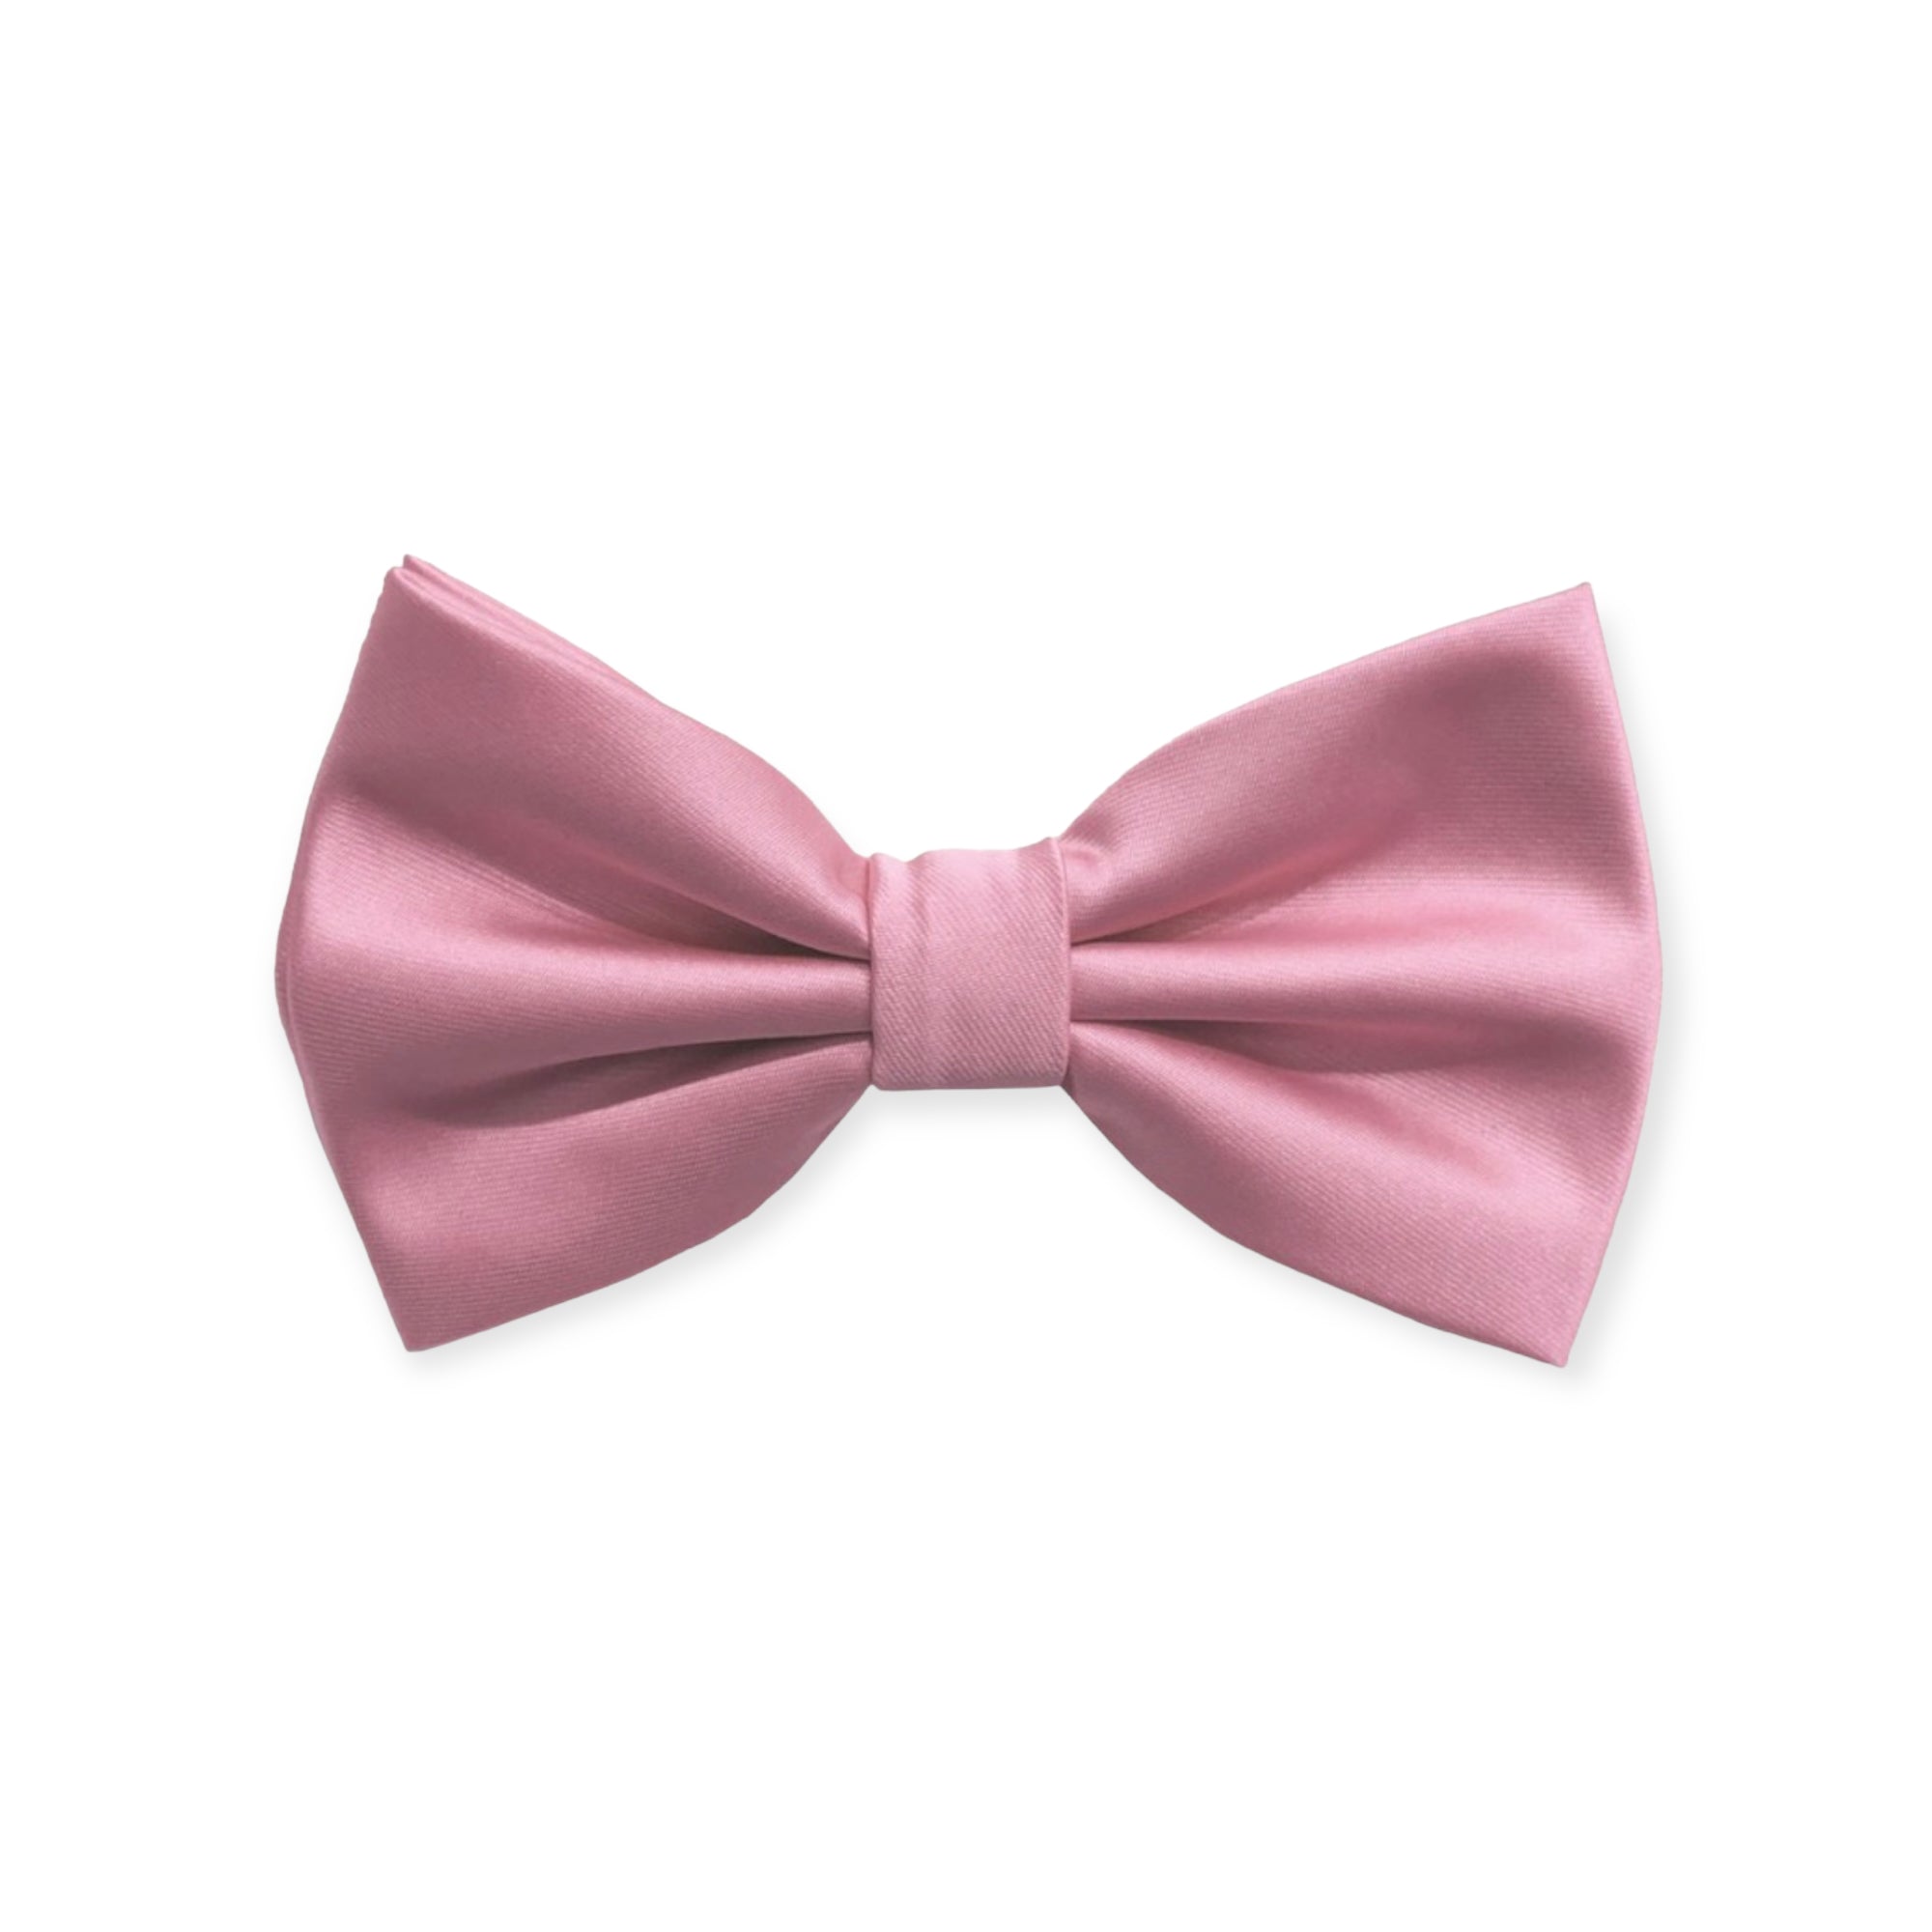 Solid Pink Bow Tie and Hanky